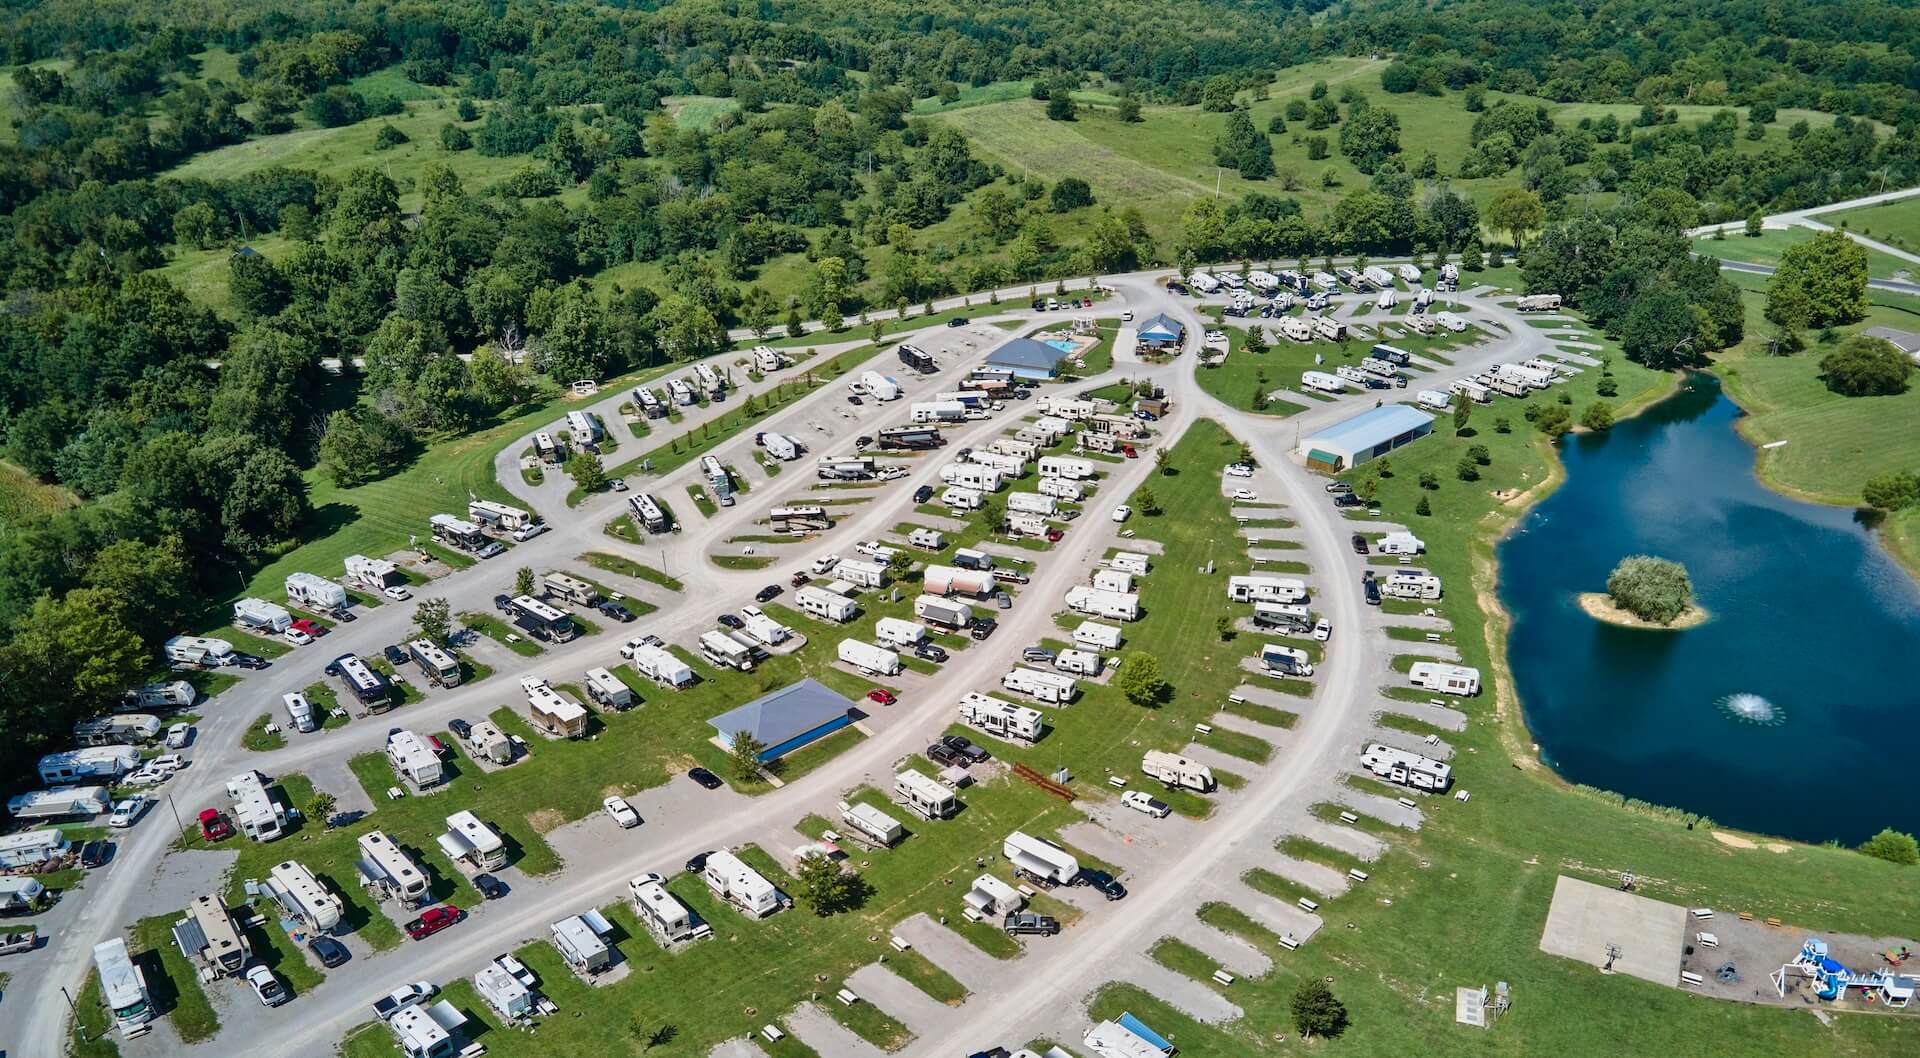 An aerial view looking out across RVs parked at Whispering Hills RV Park in Georgetown, Kentucky